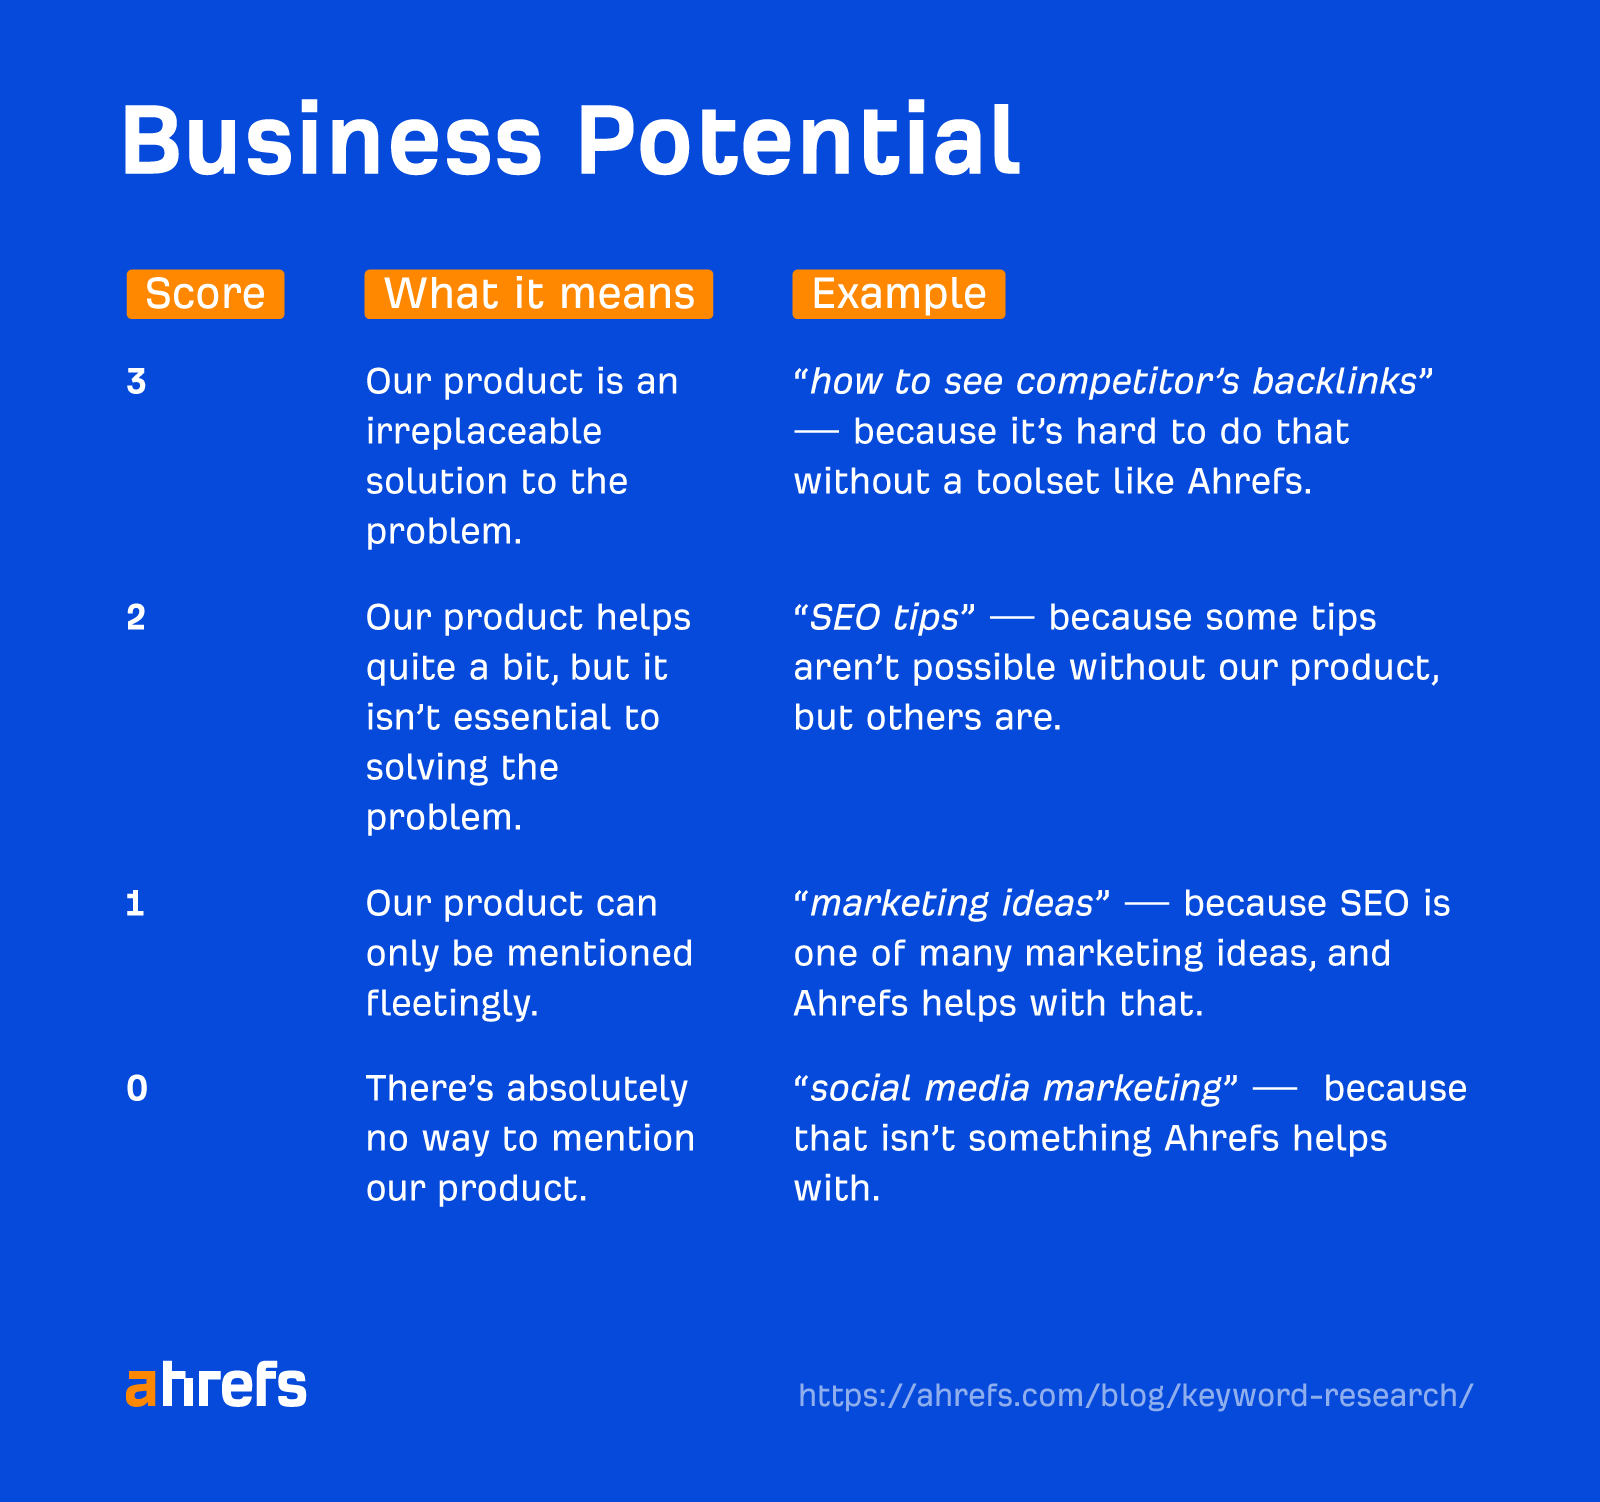 How the "business potential" scoring system works